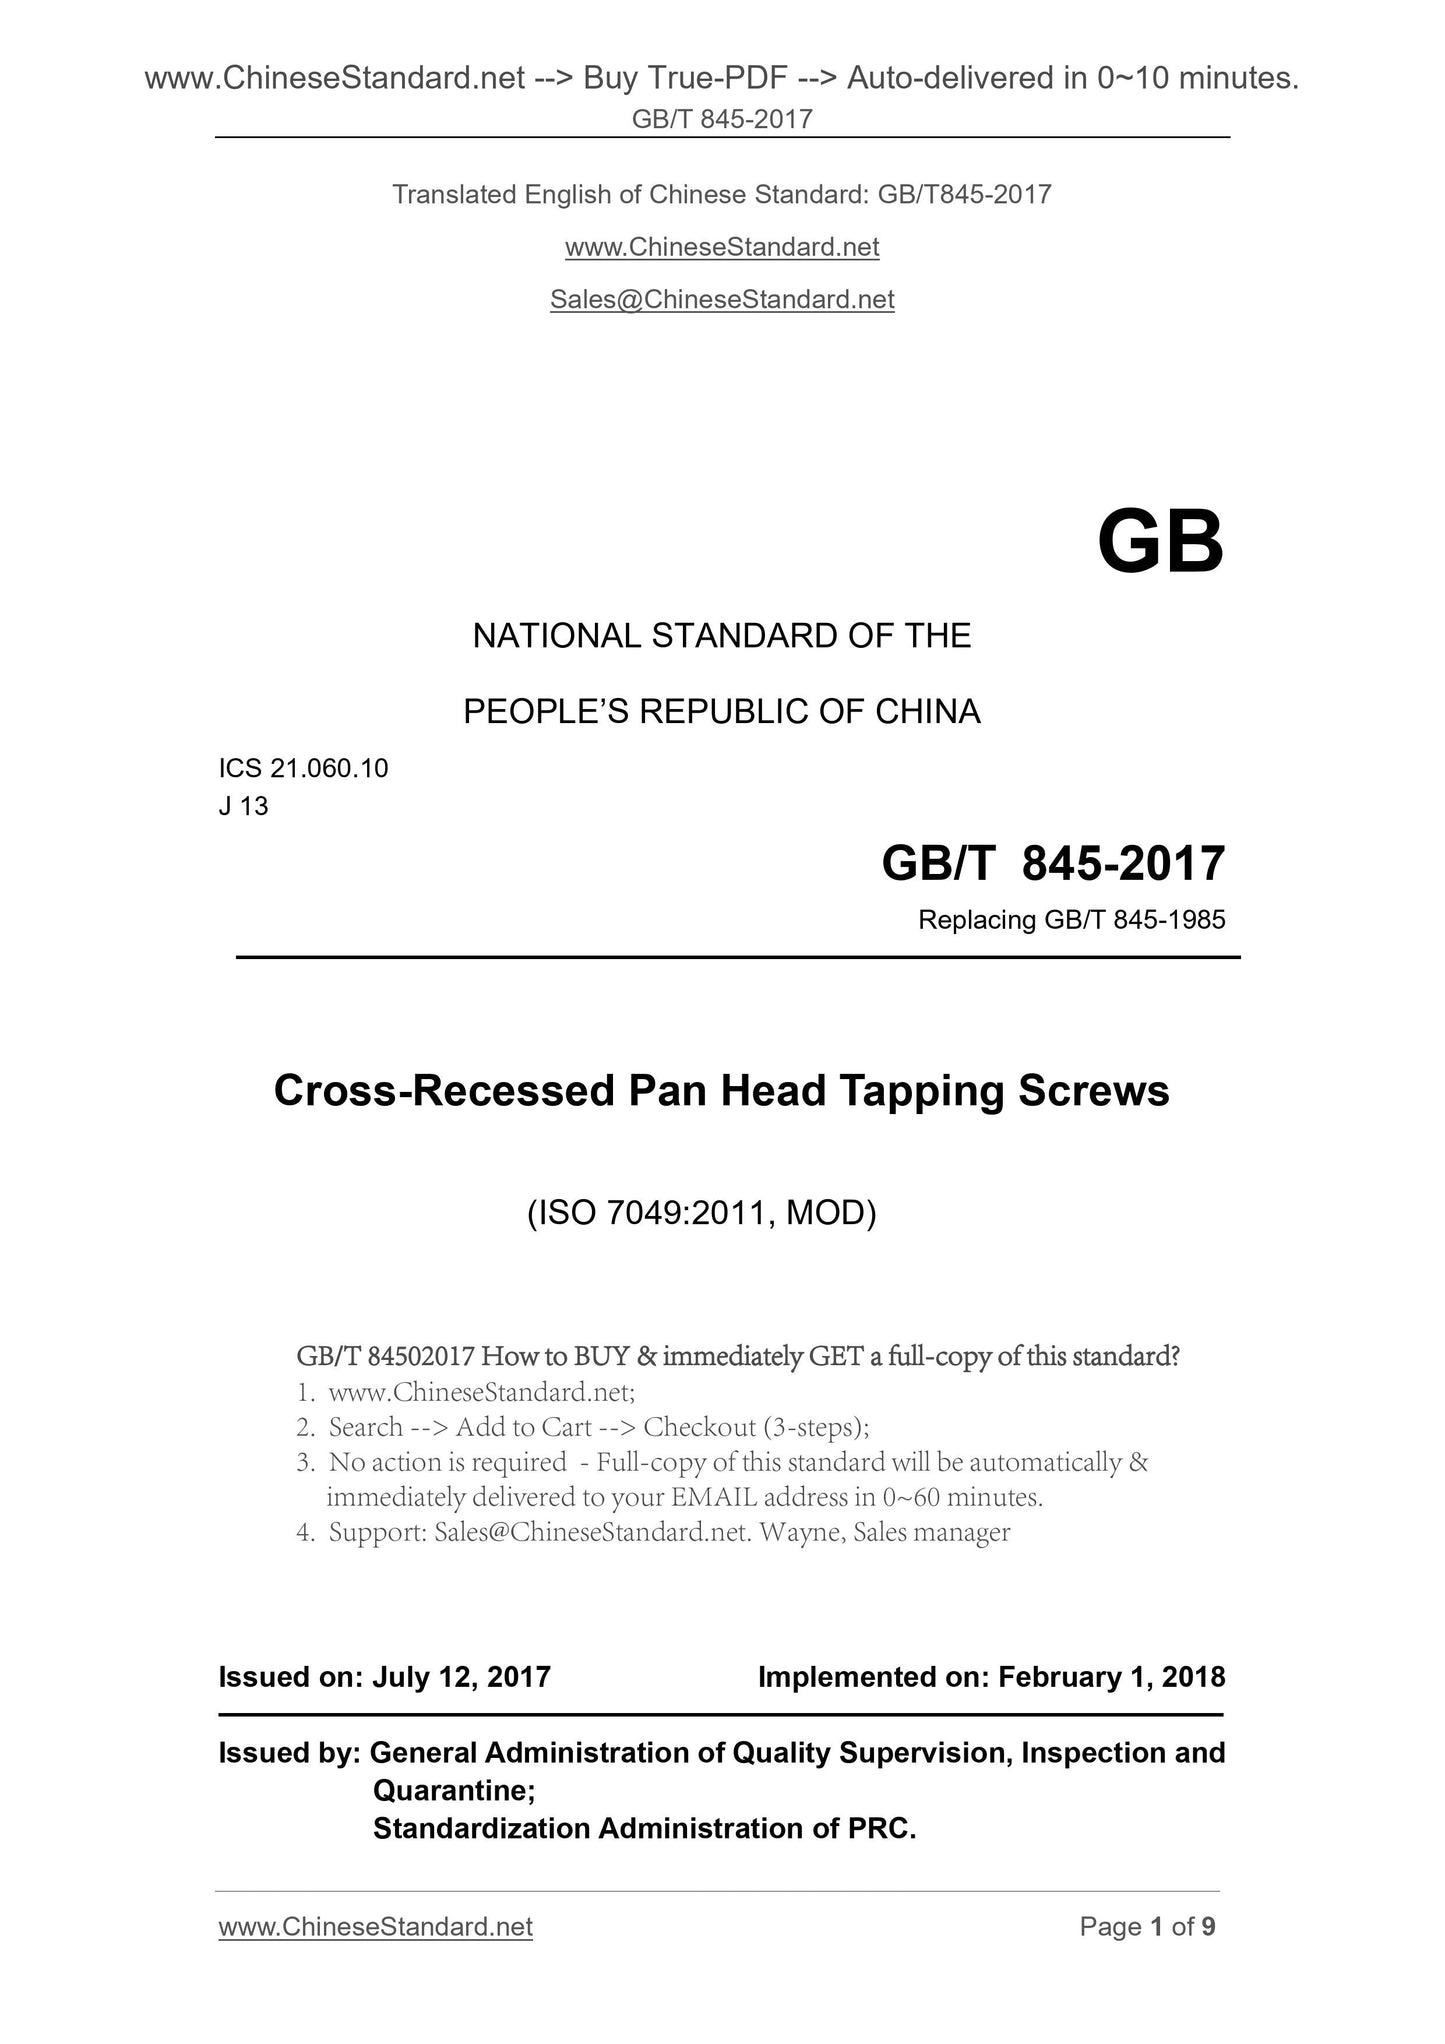 GB/T 845-2017 Page 1